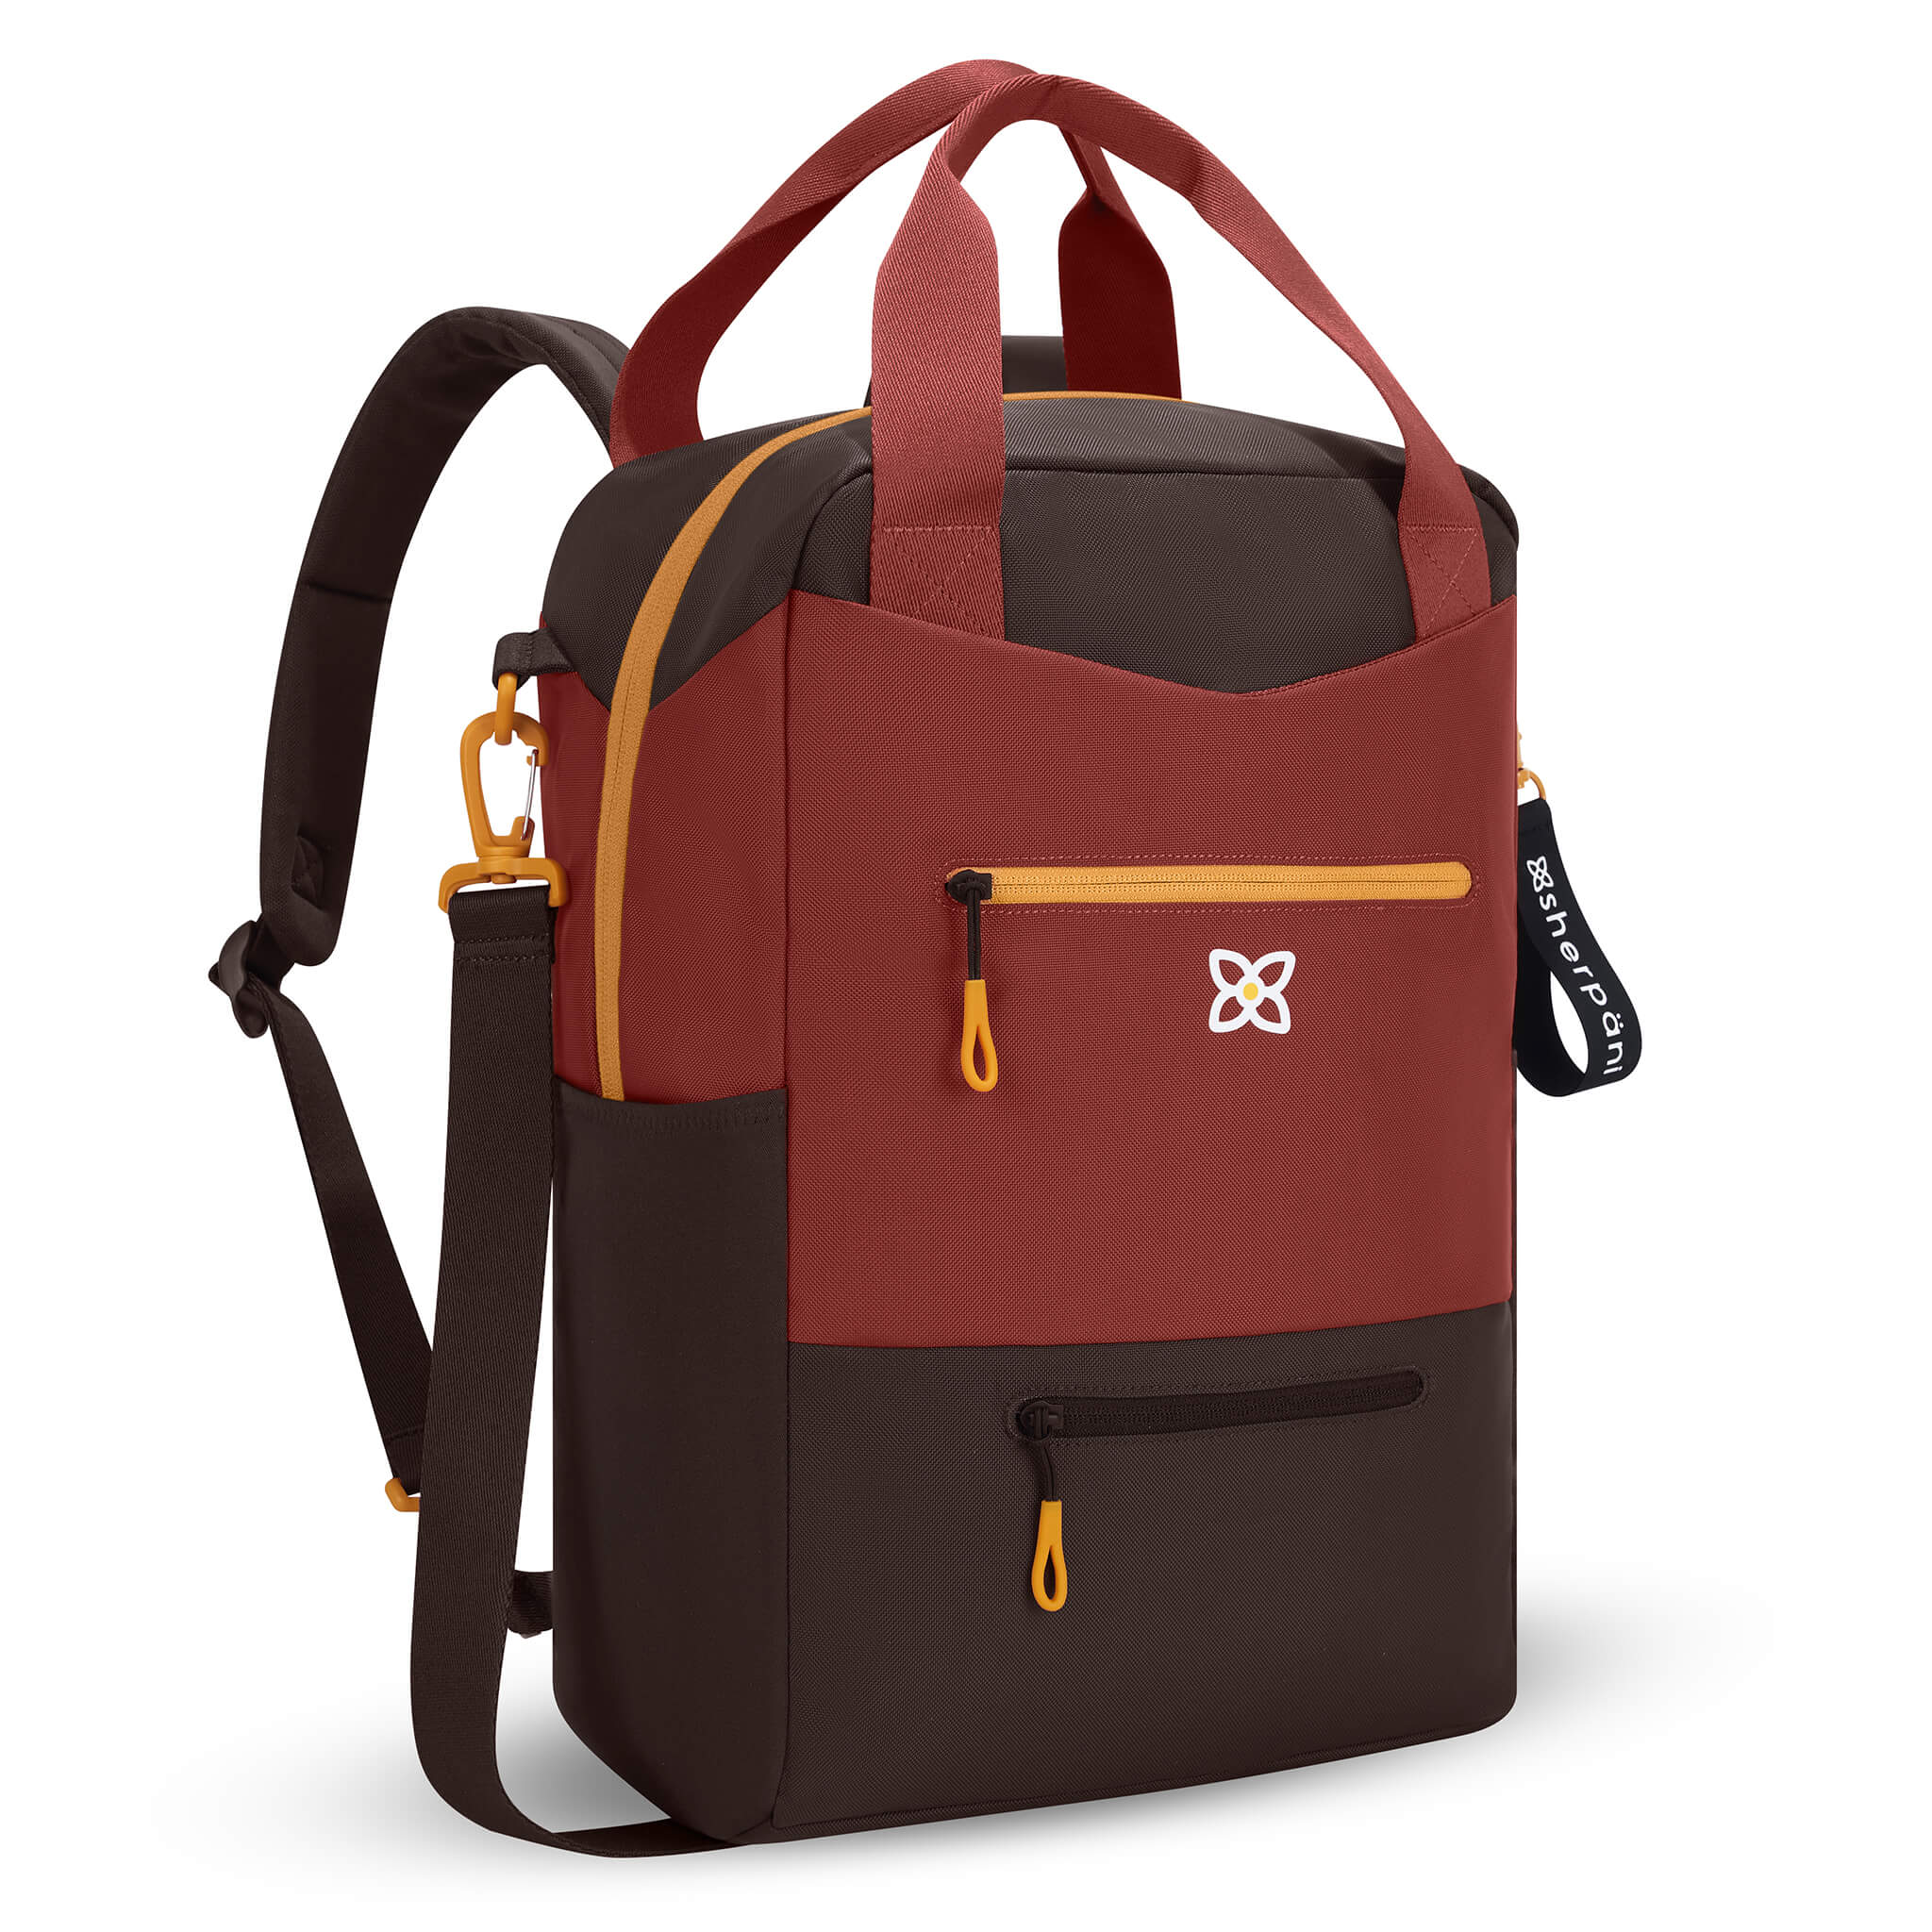 Angled front view of Sherpani convertible travel bag, the Camden in Cider. Camden features include adjustable backpack straps, adjustable crossbody strap, tote bag handles, upper zipper pocket, lower zipper pocket, padded laptop sleeve, three water bottle holders and luggage pass through feature. The Cider color is two tones in burgundy and brown with accents in yellow. 